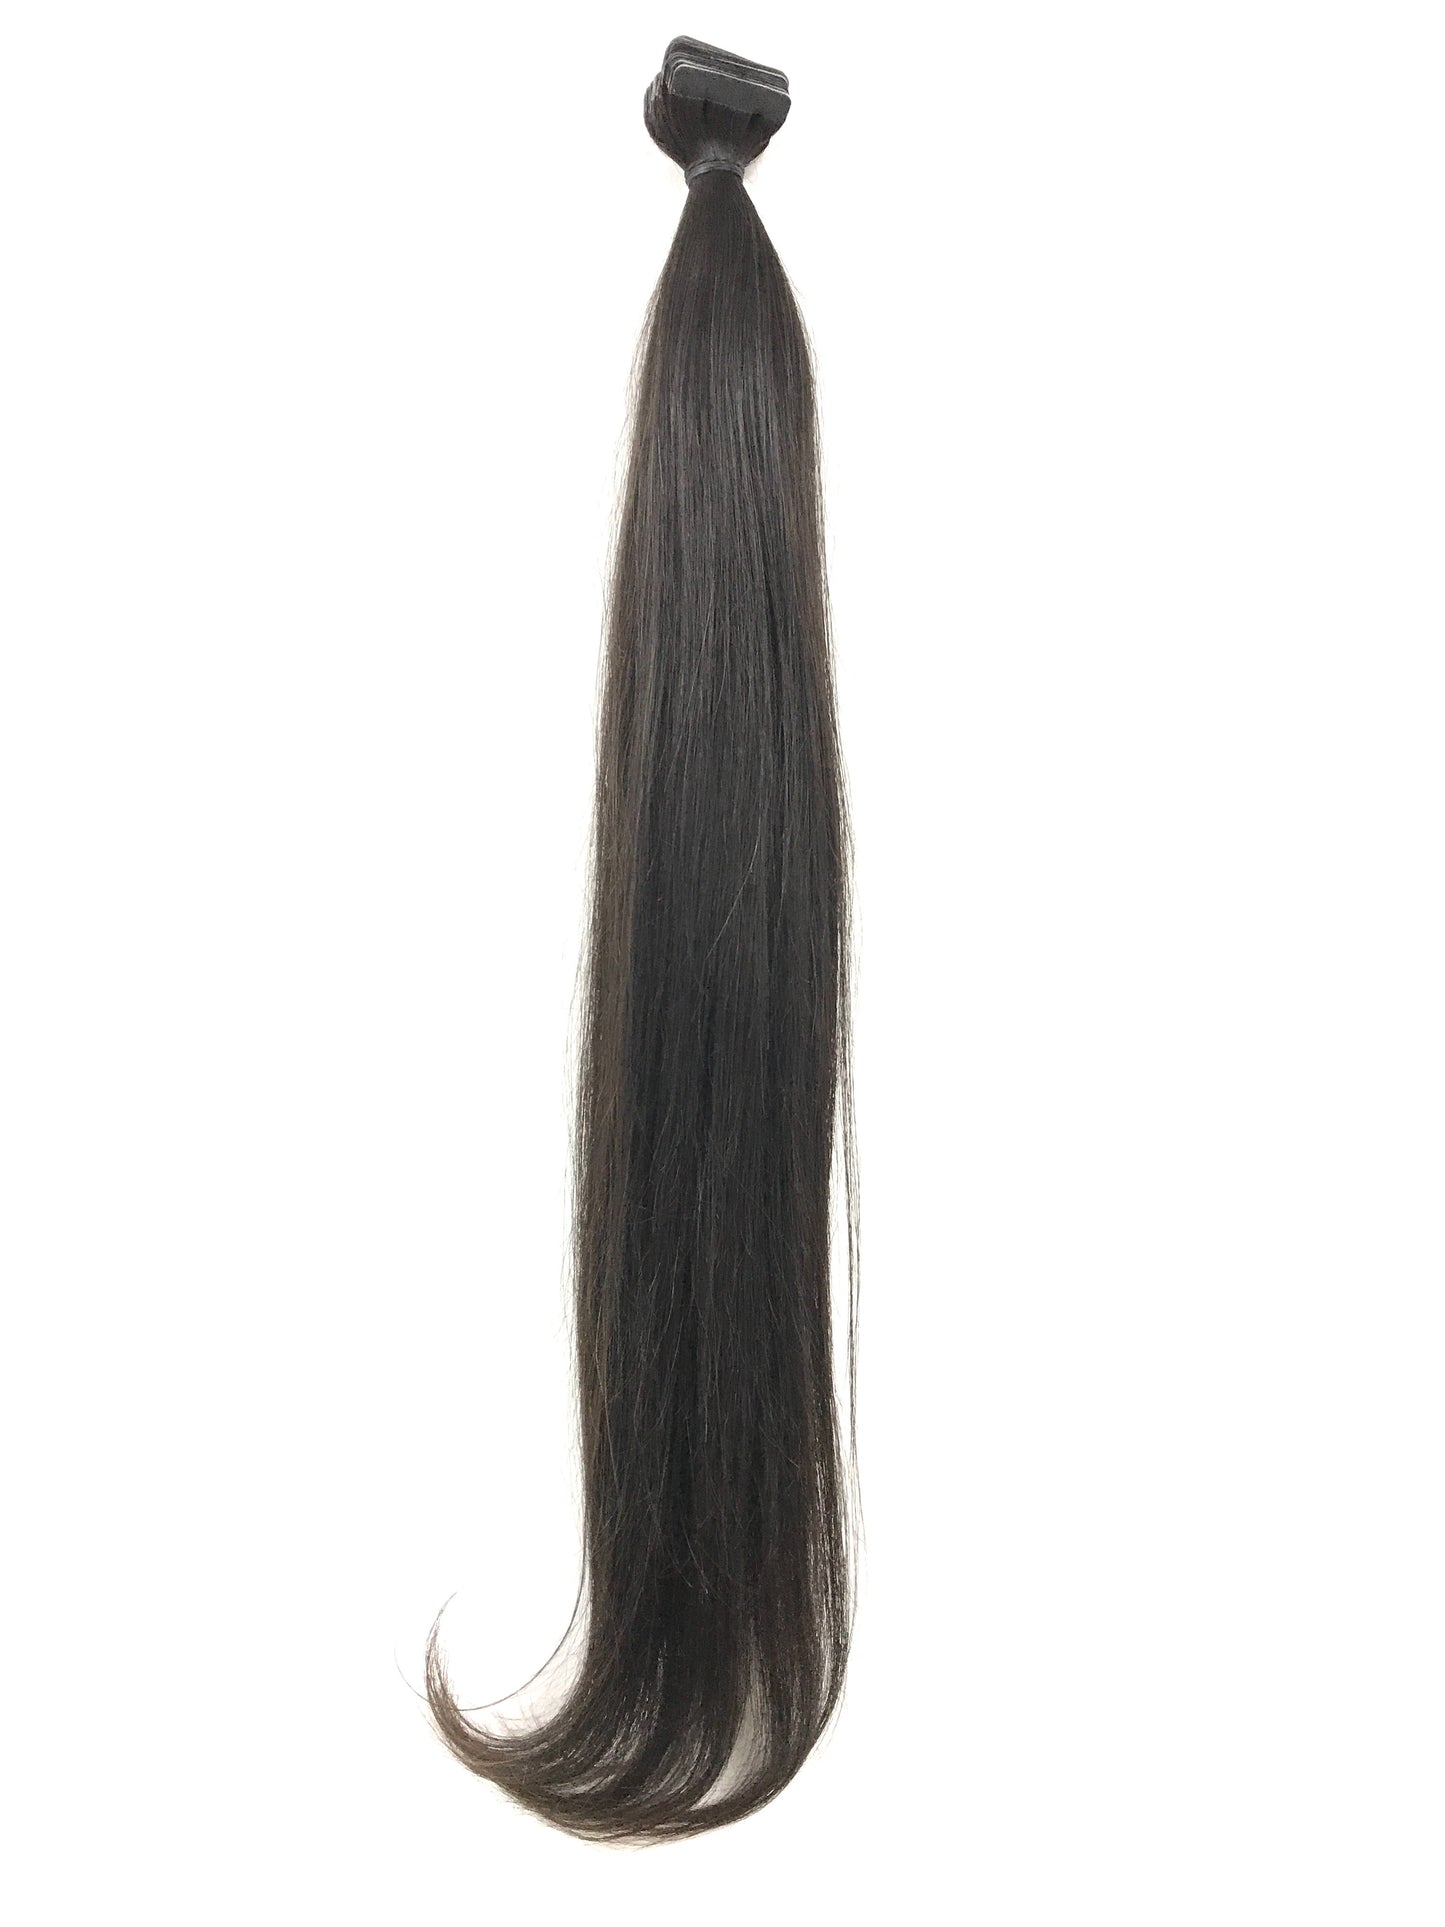 Brazilian Virgin Remy Human Hair, Tape Extensions, Straight, 24'', Virgin, Uncoloured. Quick Shipping!-Virgin Hair & Beauty, The Best Hair Extensions, Real Virgin Human Hair.